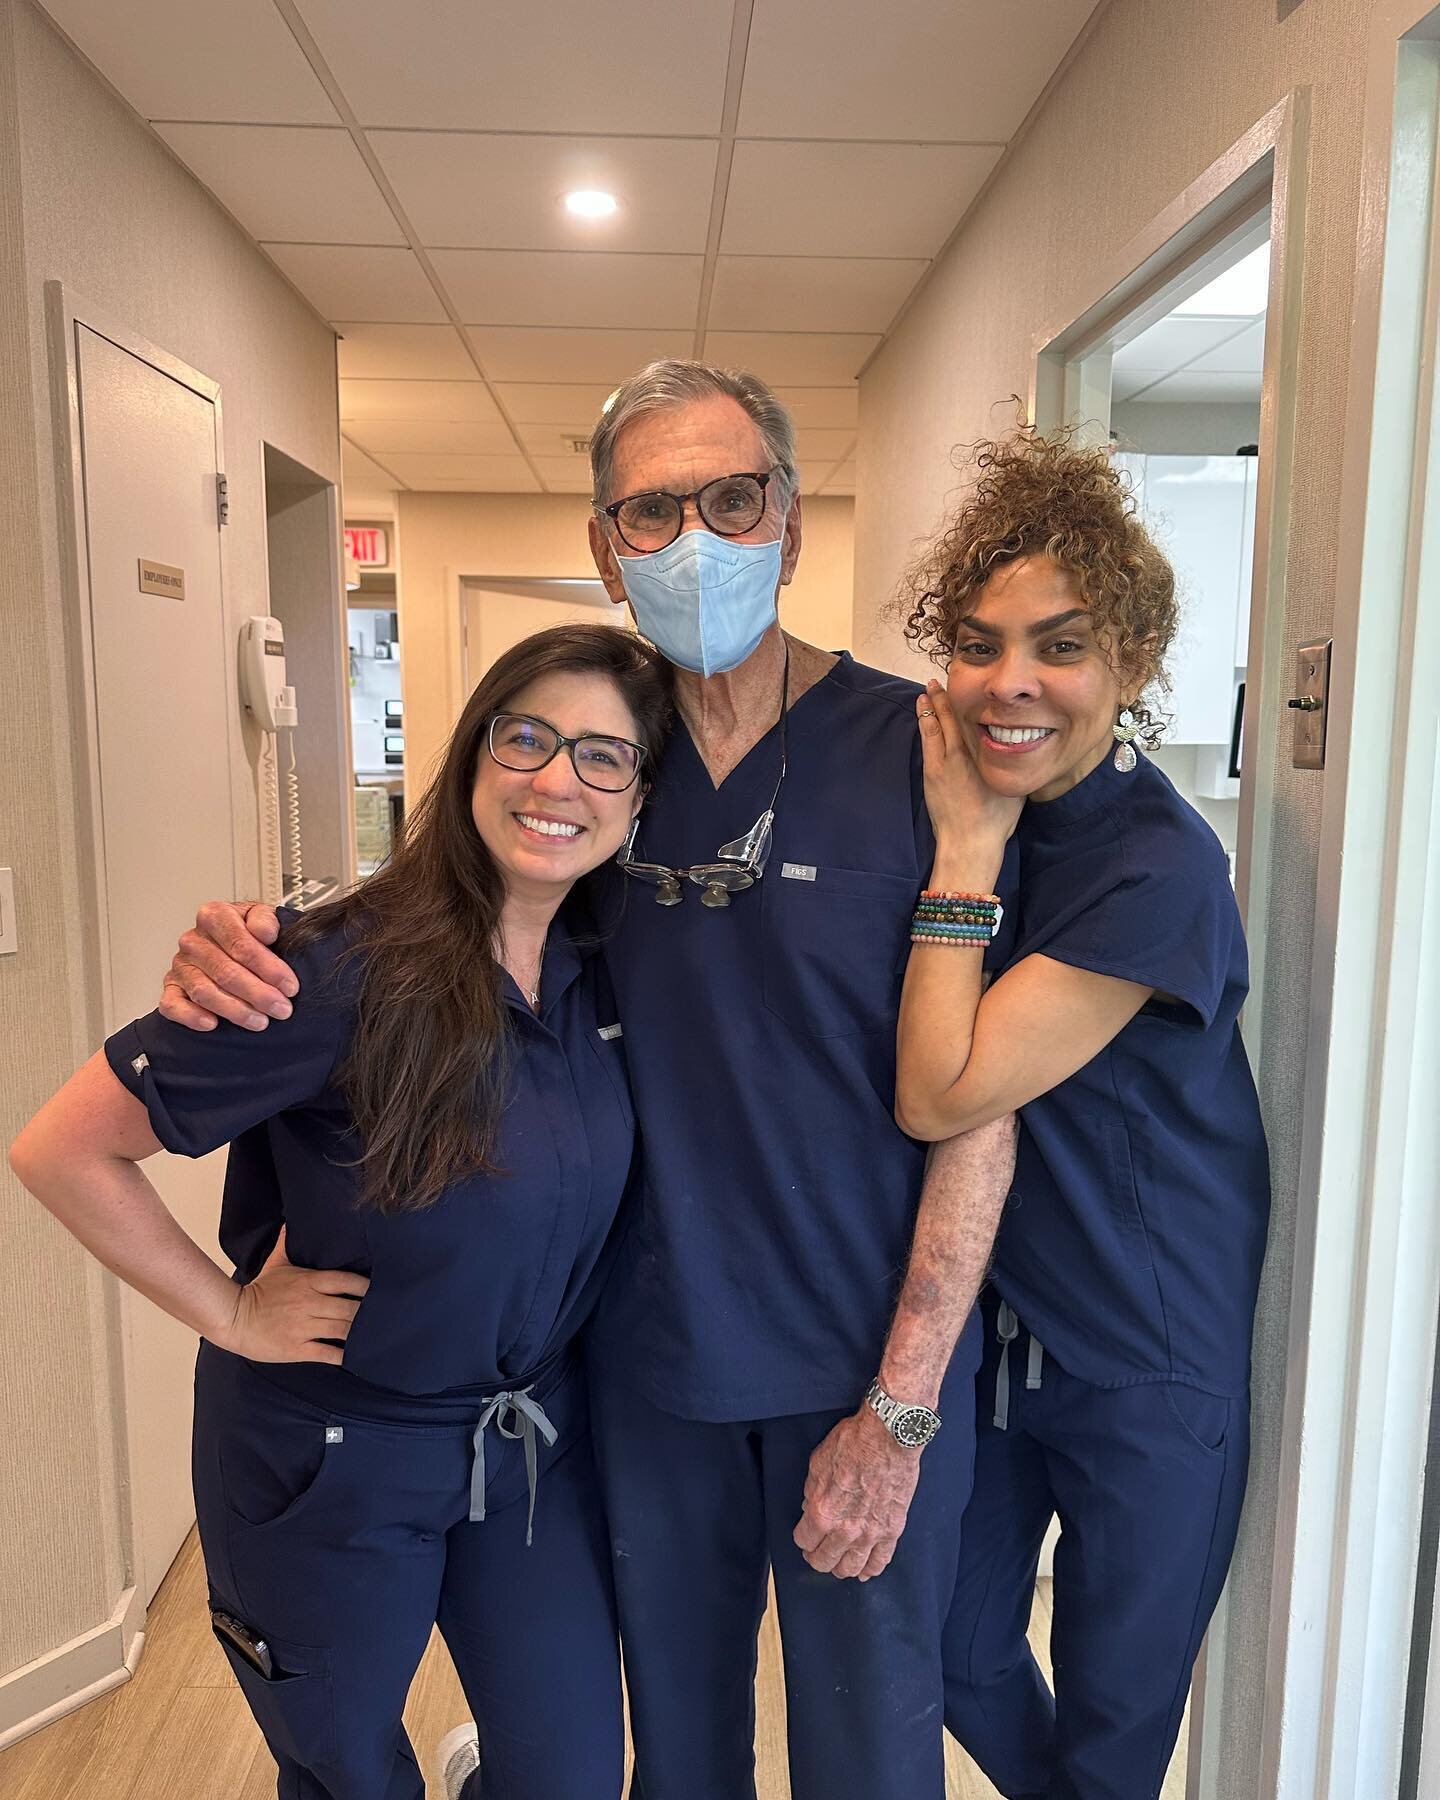 At One Manhattan Dental, we know that teamwork makes the dream work! Our amazing team works together seamlessly to provide you with the best dental care possible. From routine cleanings to complex procedures, we're here to keep your smile healthy and